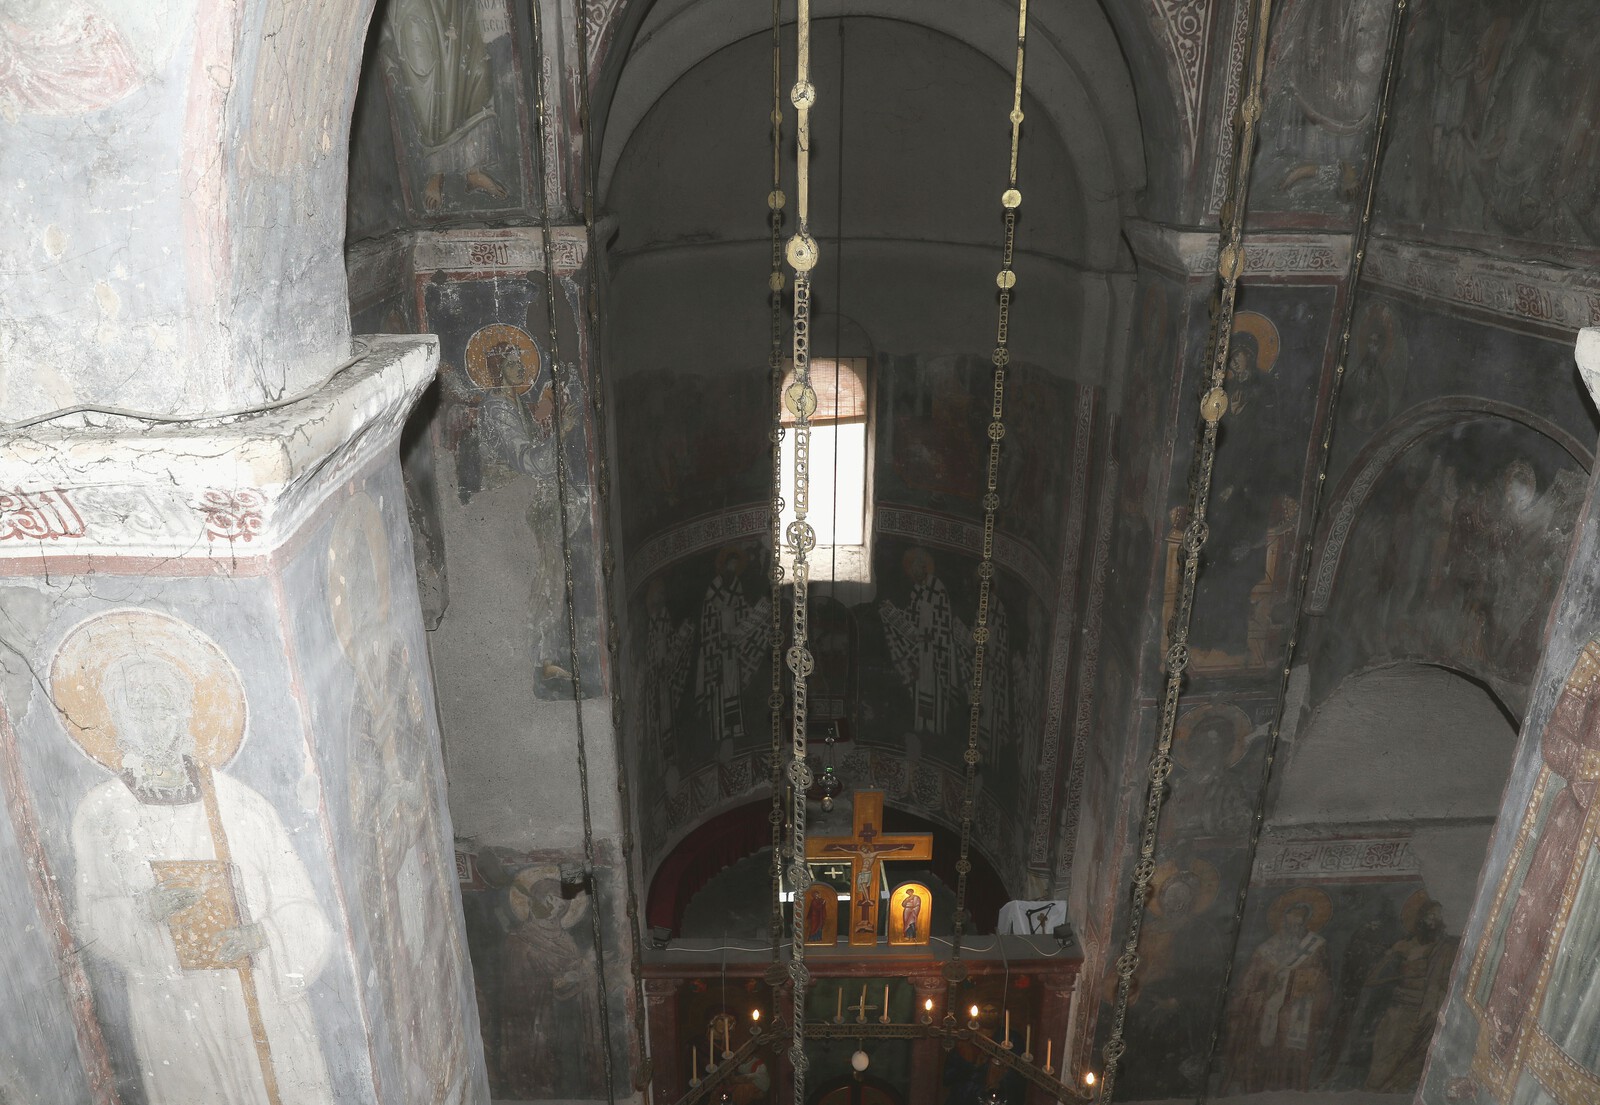 View from the nave to the sanctuary